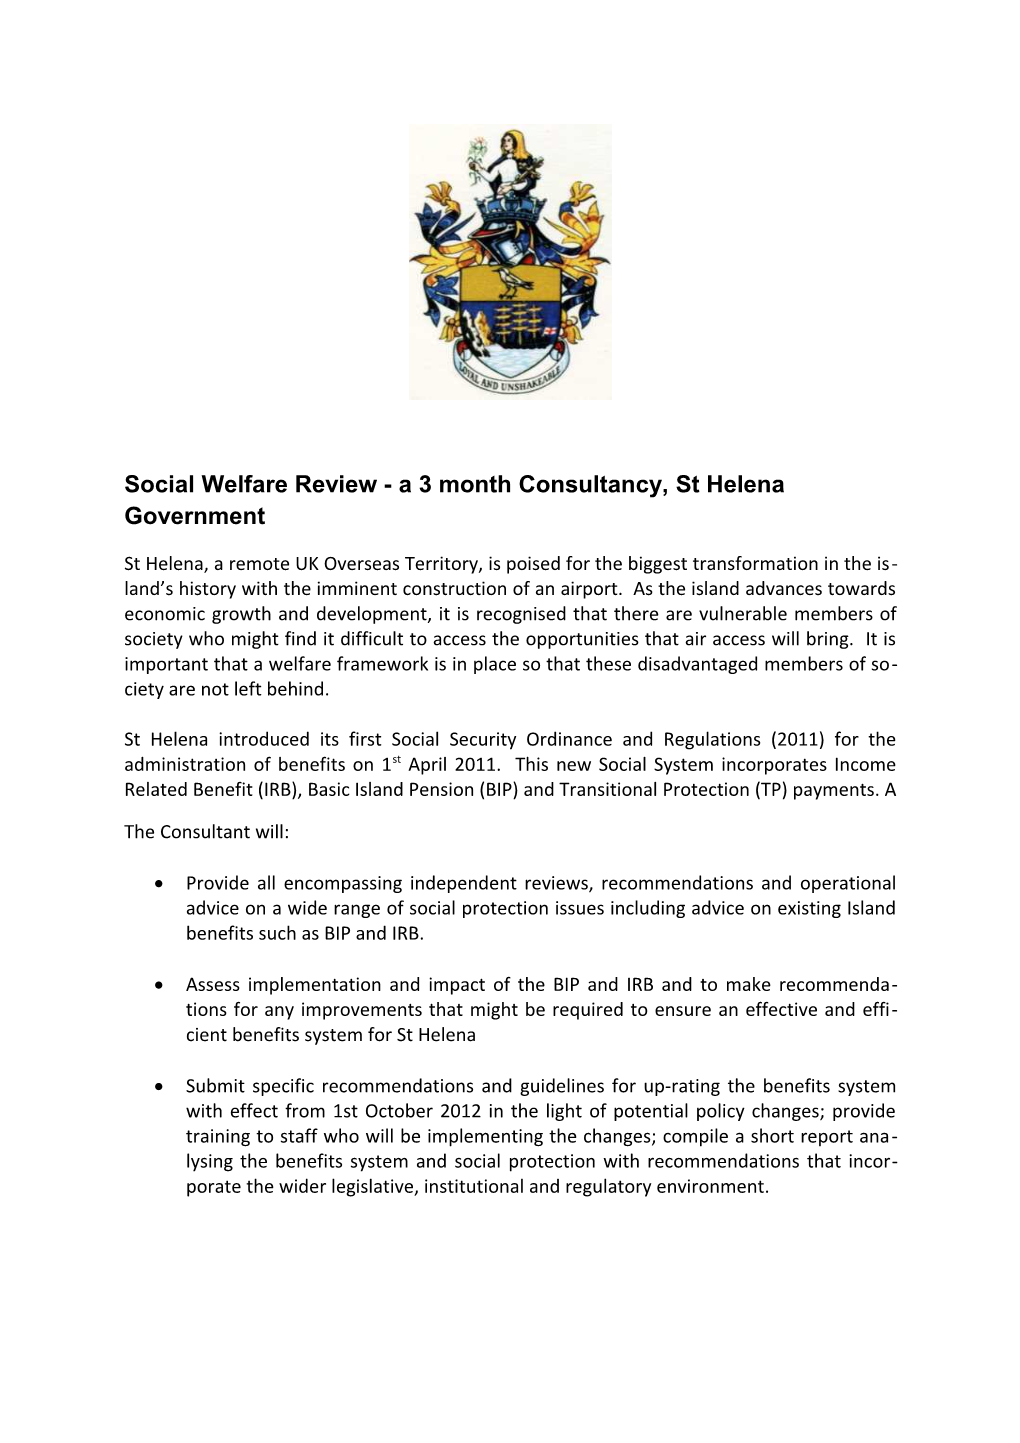 Social Welfare Review - a 3 Month Consultancy, St Helena Government